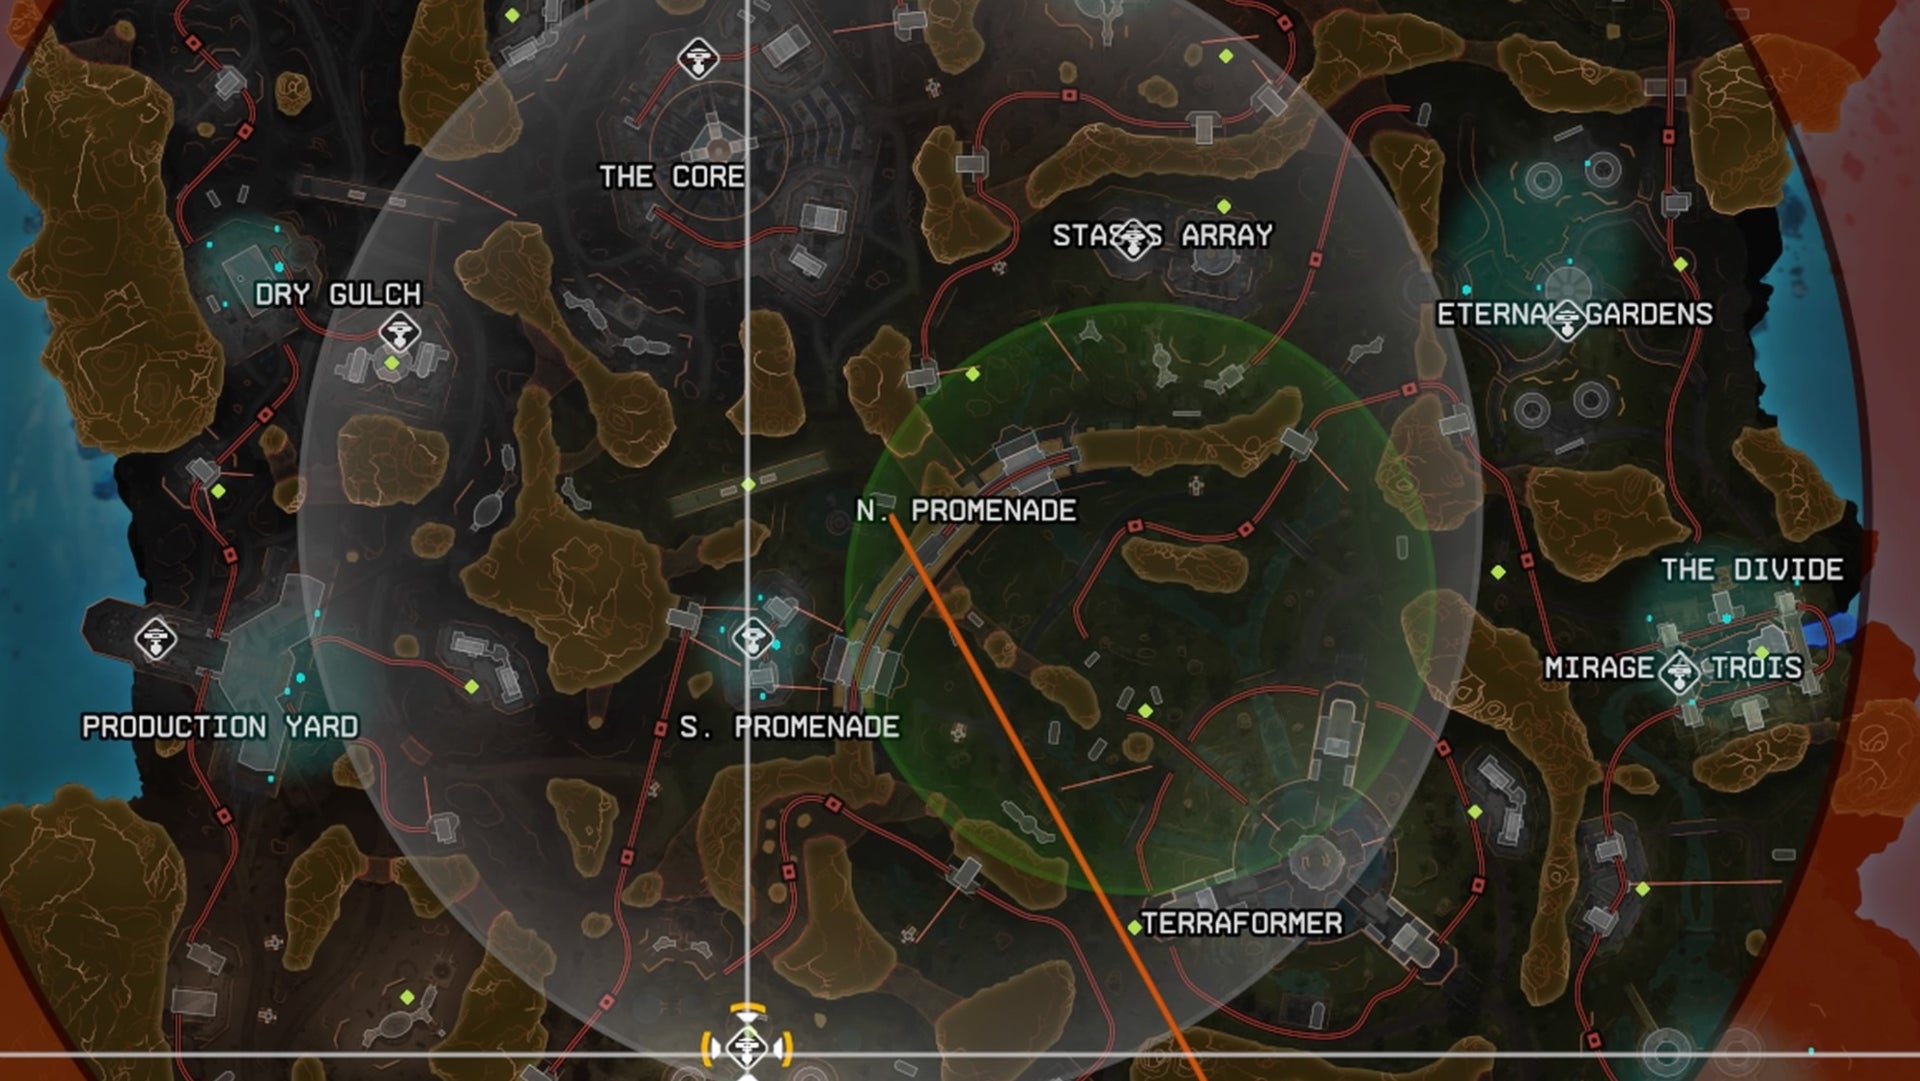 Apex Legends, the Broken Moon map shows the inner circle highlighted for the ring's next location.